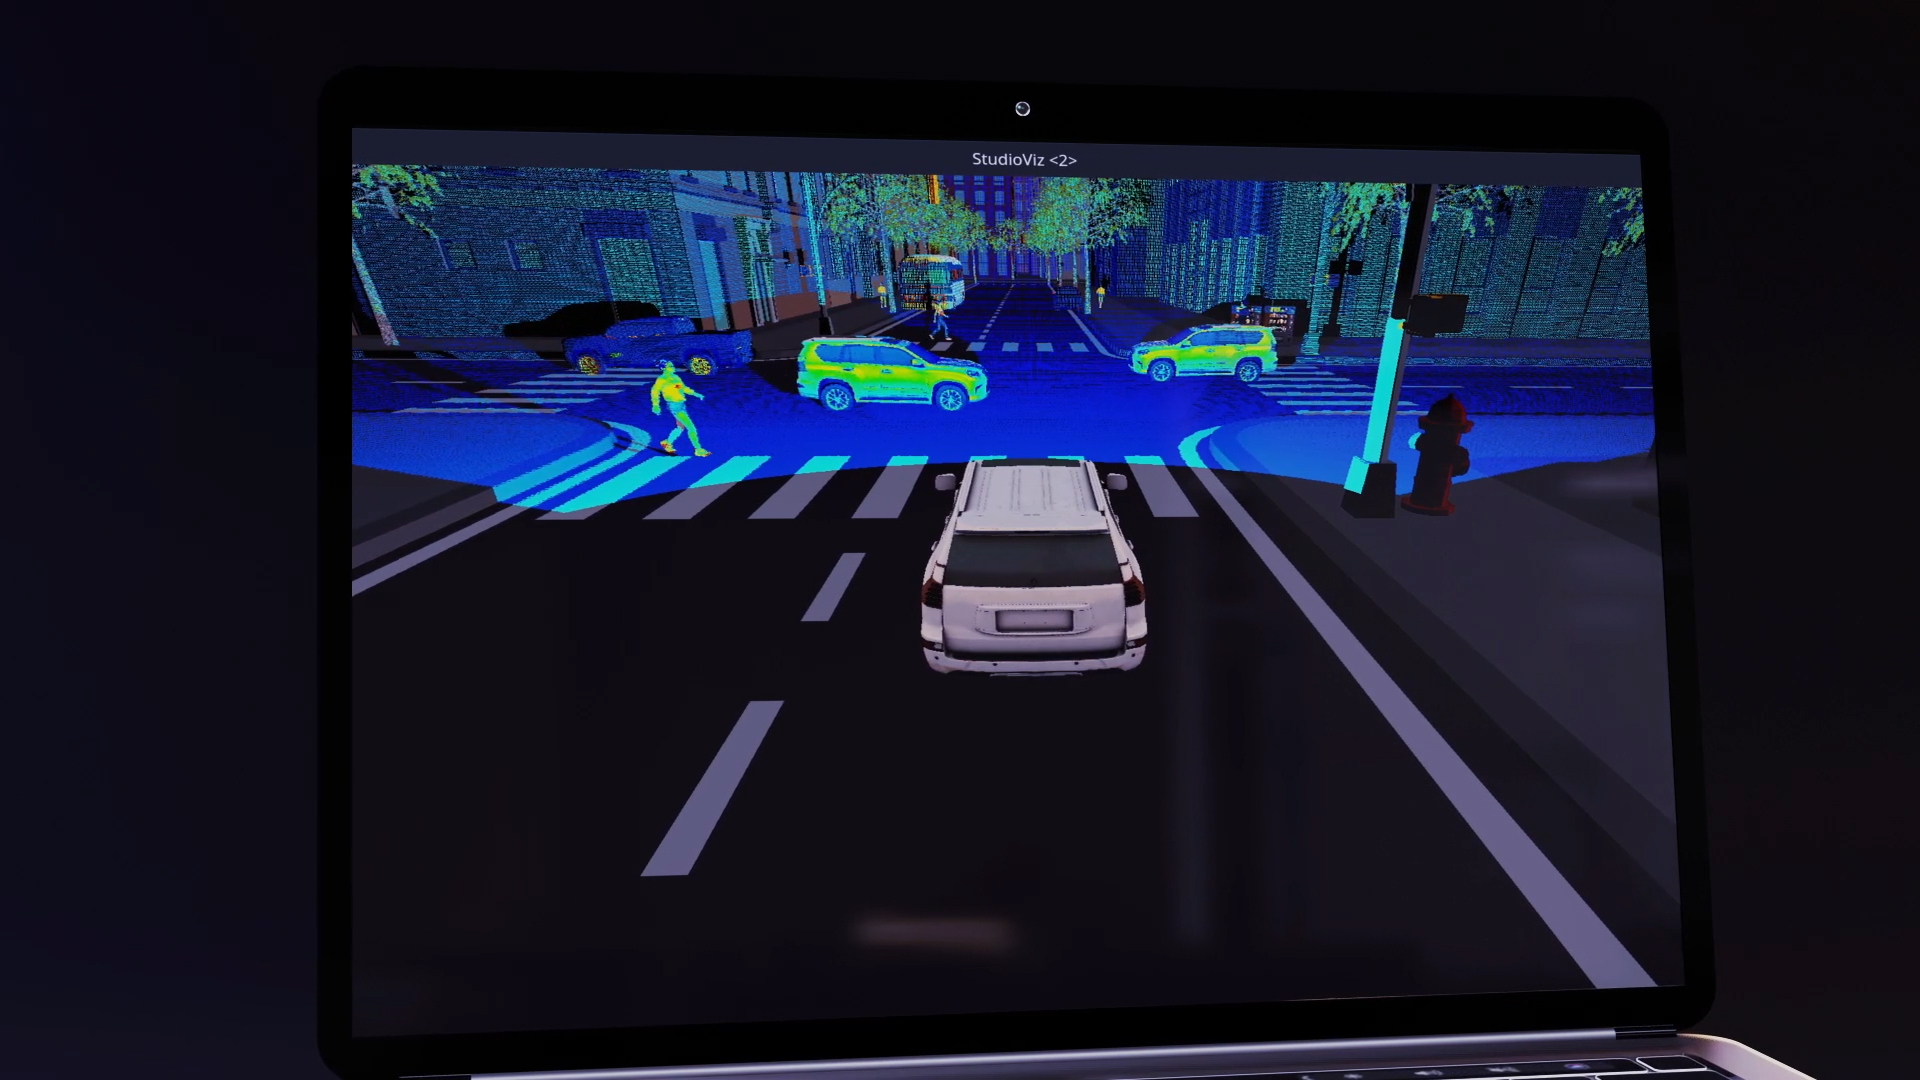 With the launch of StudioViz, Cepton plans to help automotive engineers and researchers worldwide accelerate innovation in lidar-based ADAS and AV solutions.